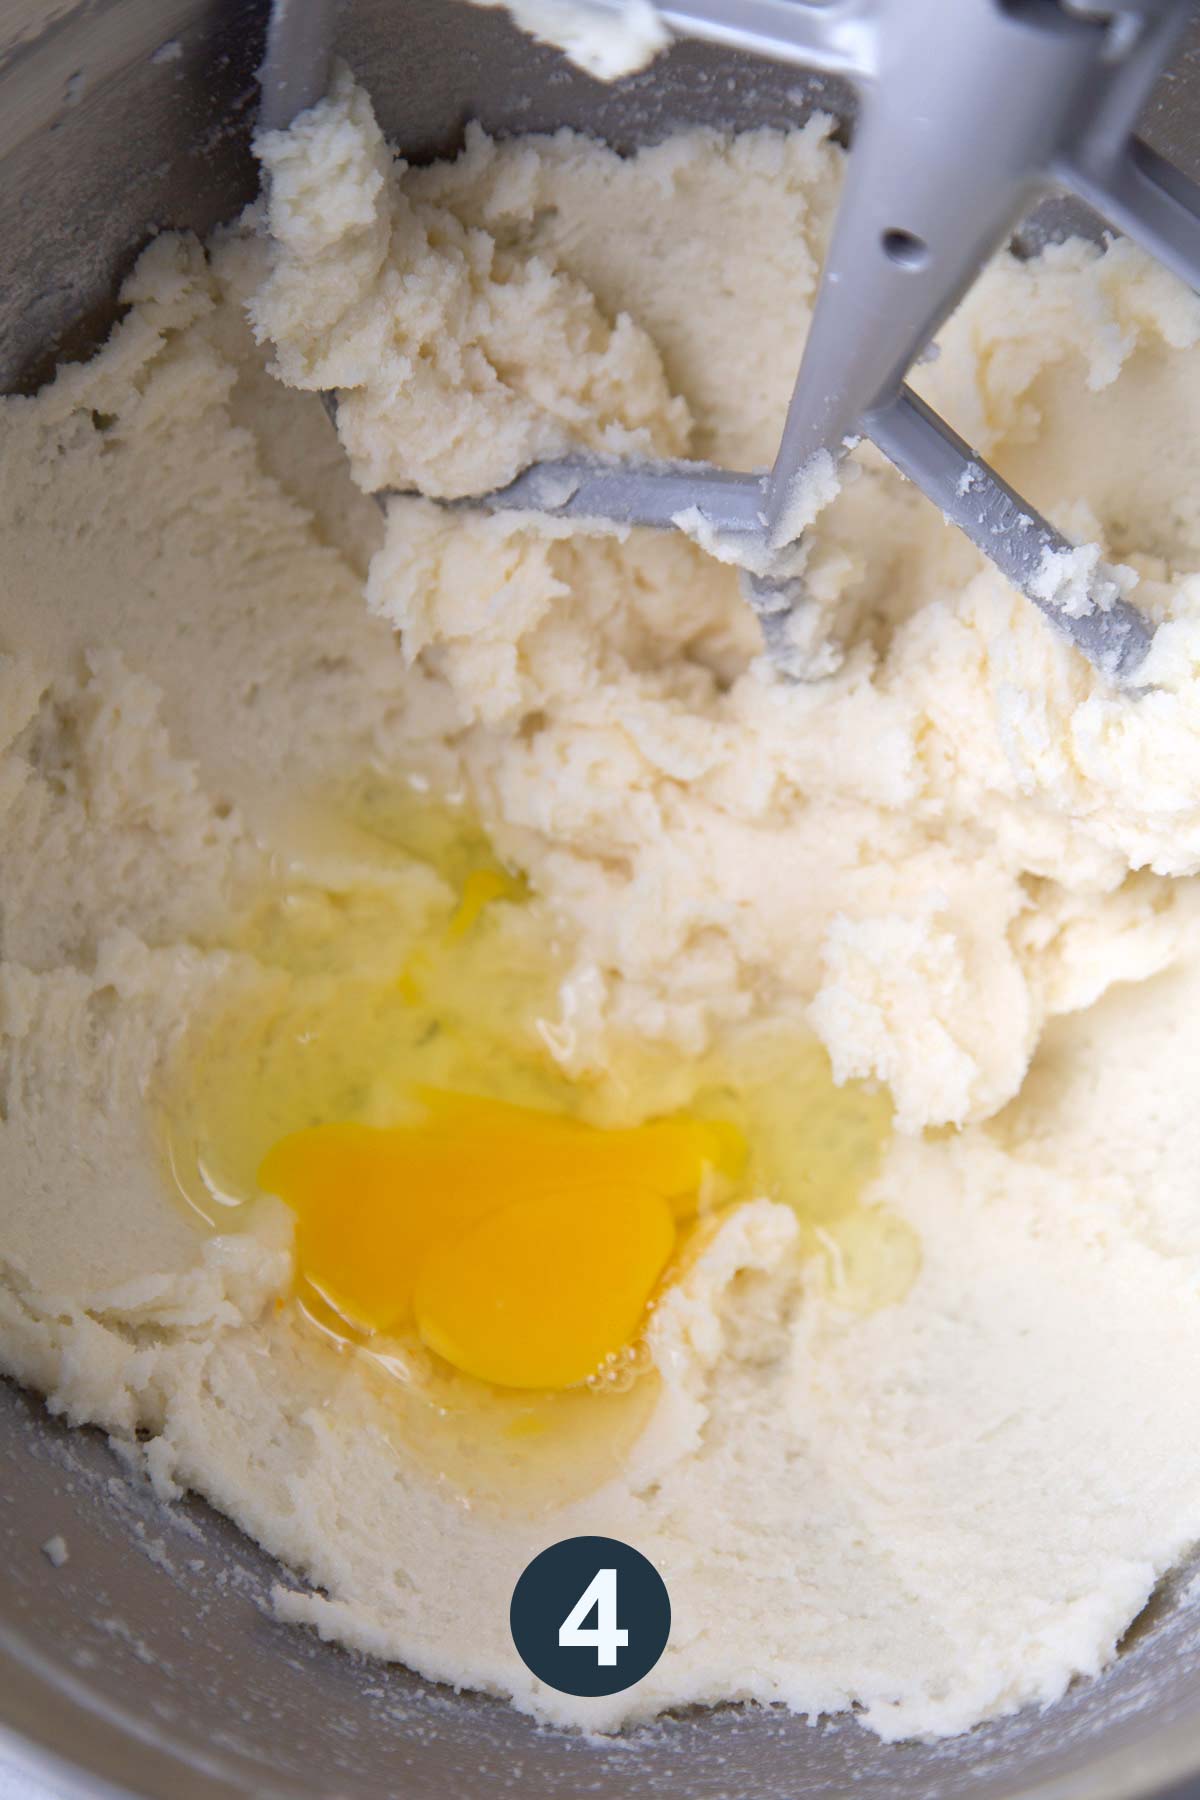 add eggs to cake batter and mix until well incorporated.